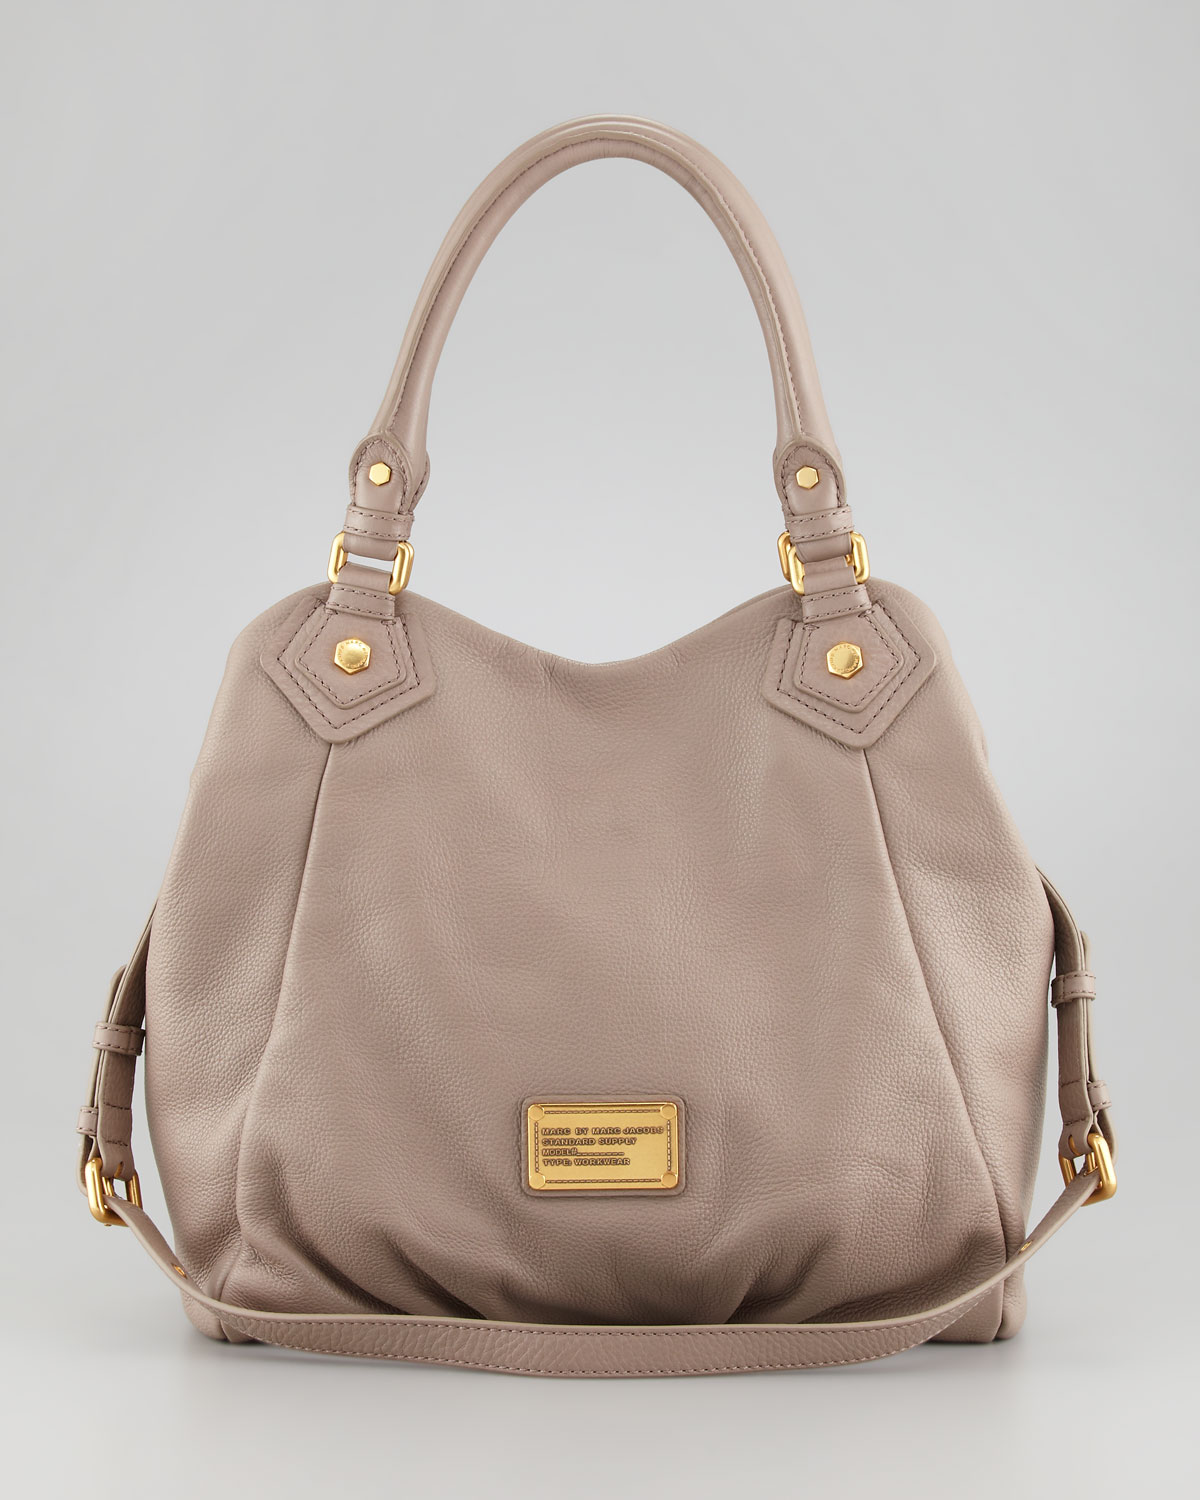 Marc Jacobs Satchel Bag Low Cost F0bc1 3ae1b Unfortunately, we were unable to find any items in the price range you selected. marc jacobs satchel bag low cost f0bc1